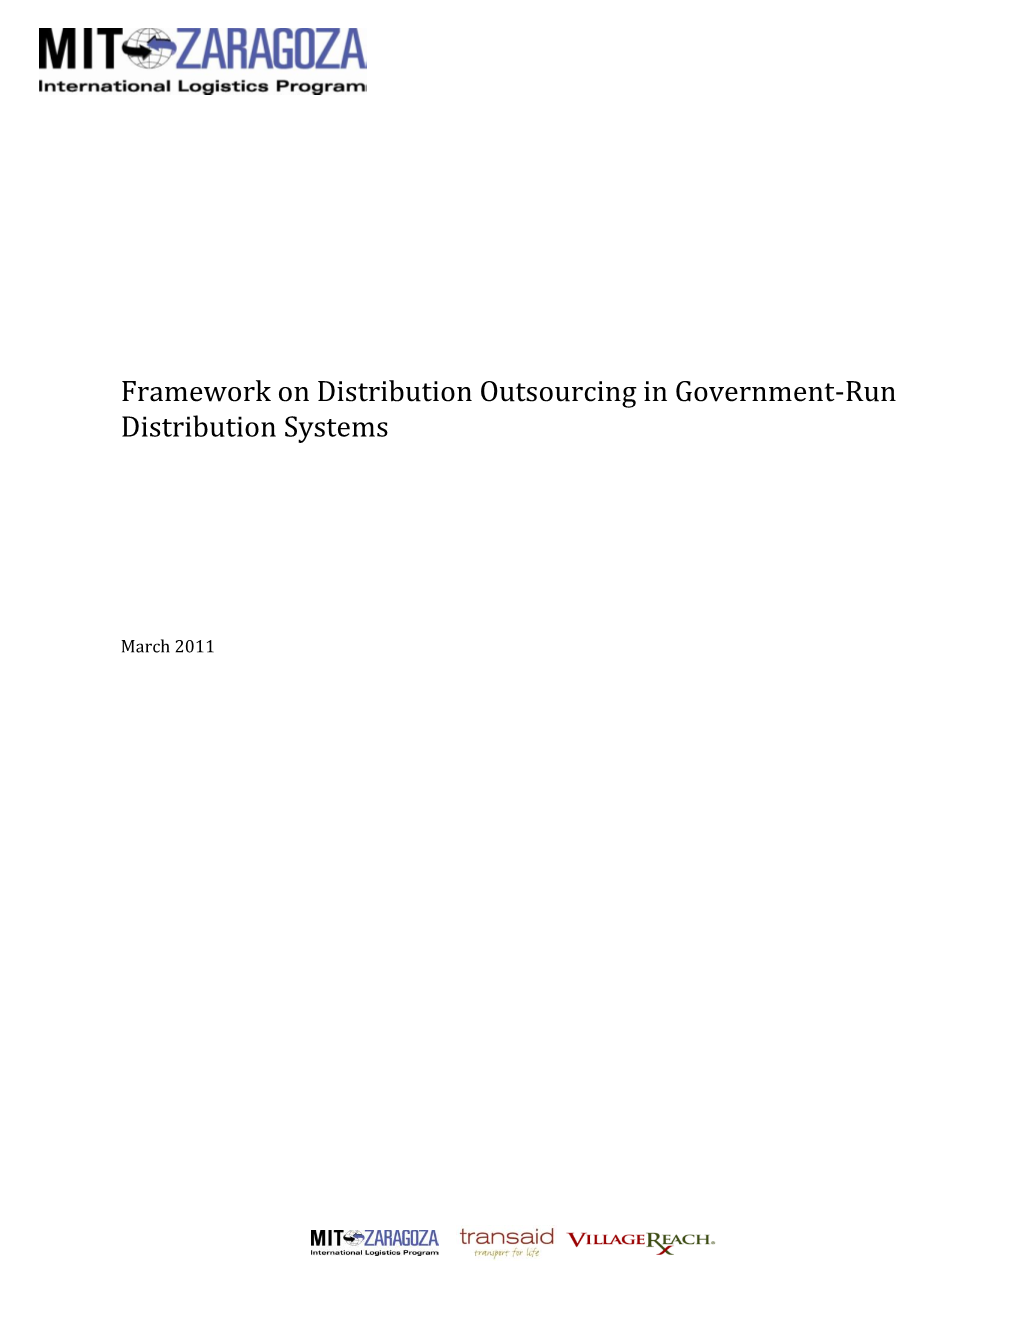 Framework on Distribution Outsourcing in Government-Run Distribution Systems